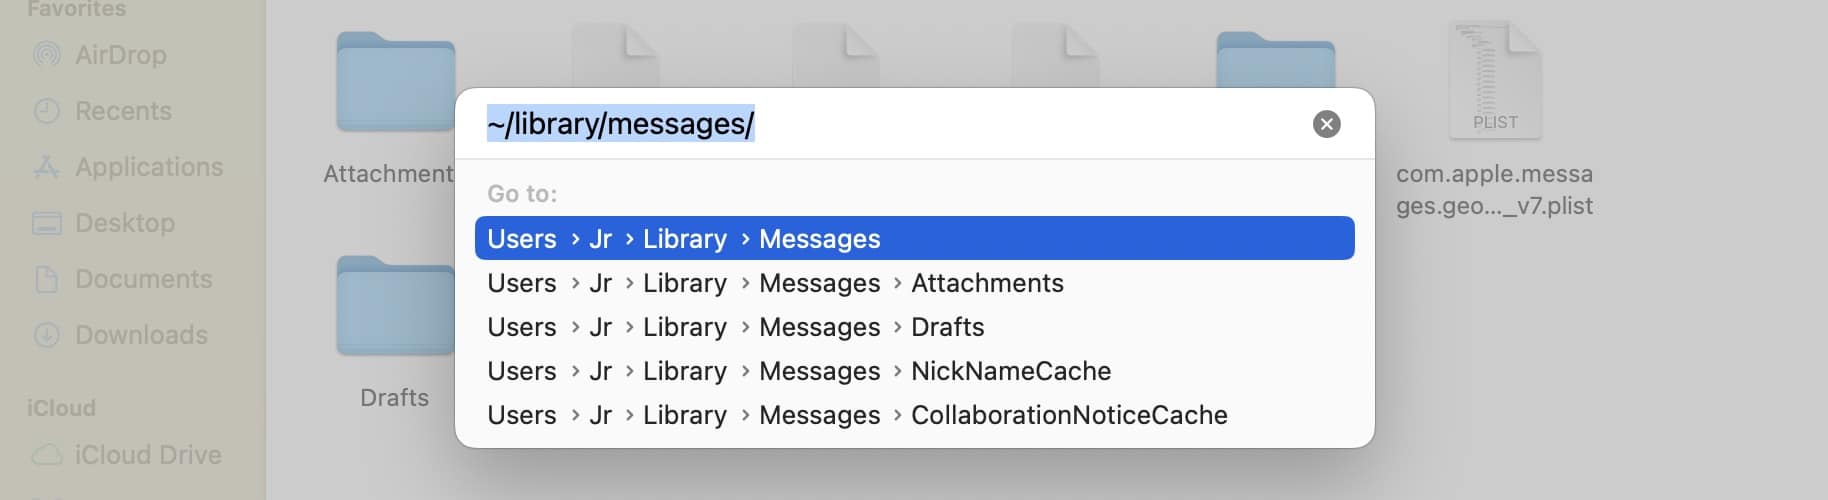 Searching library/messages/archives on Finder